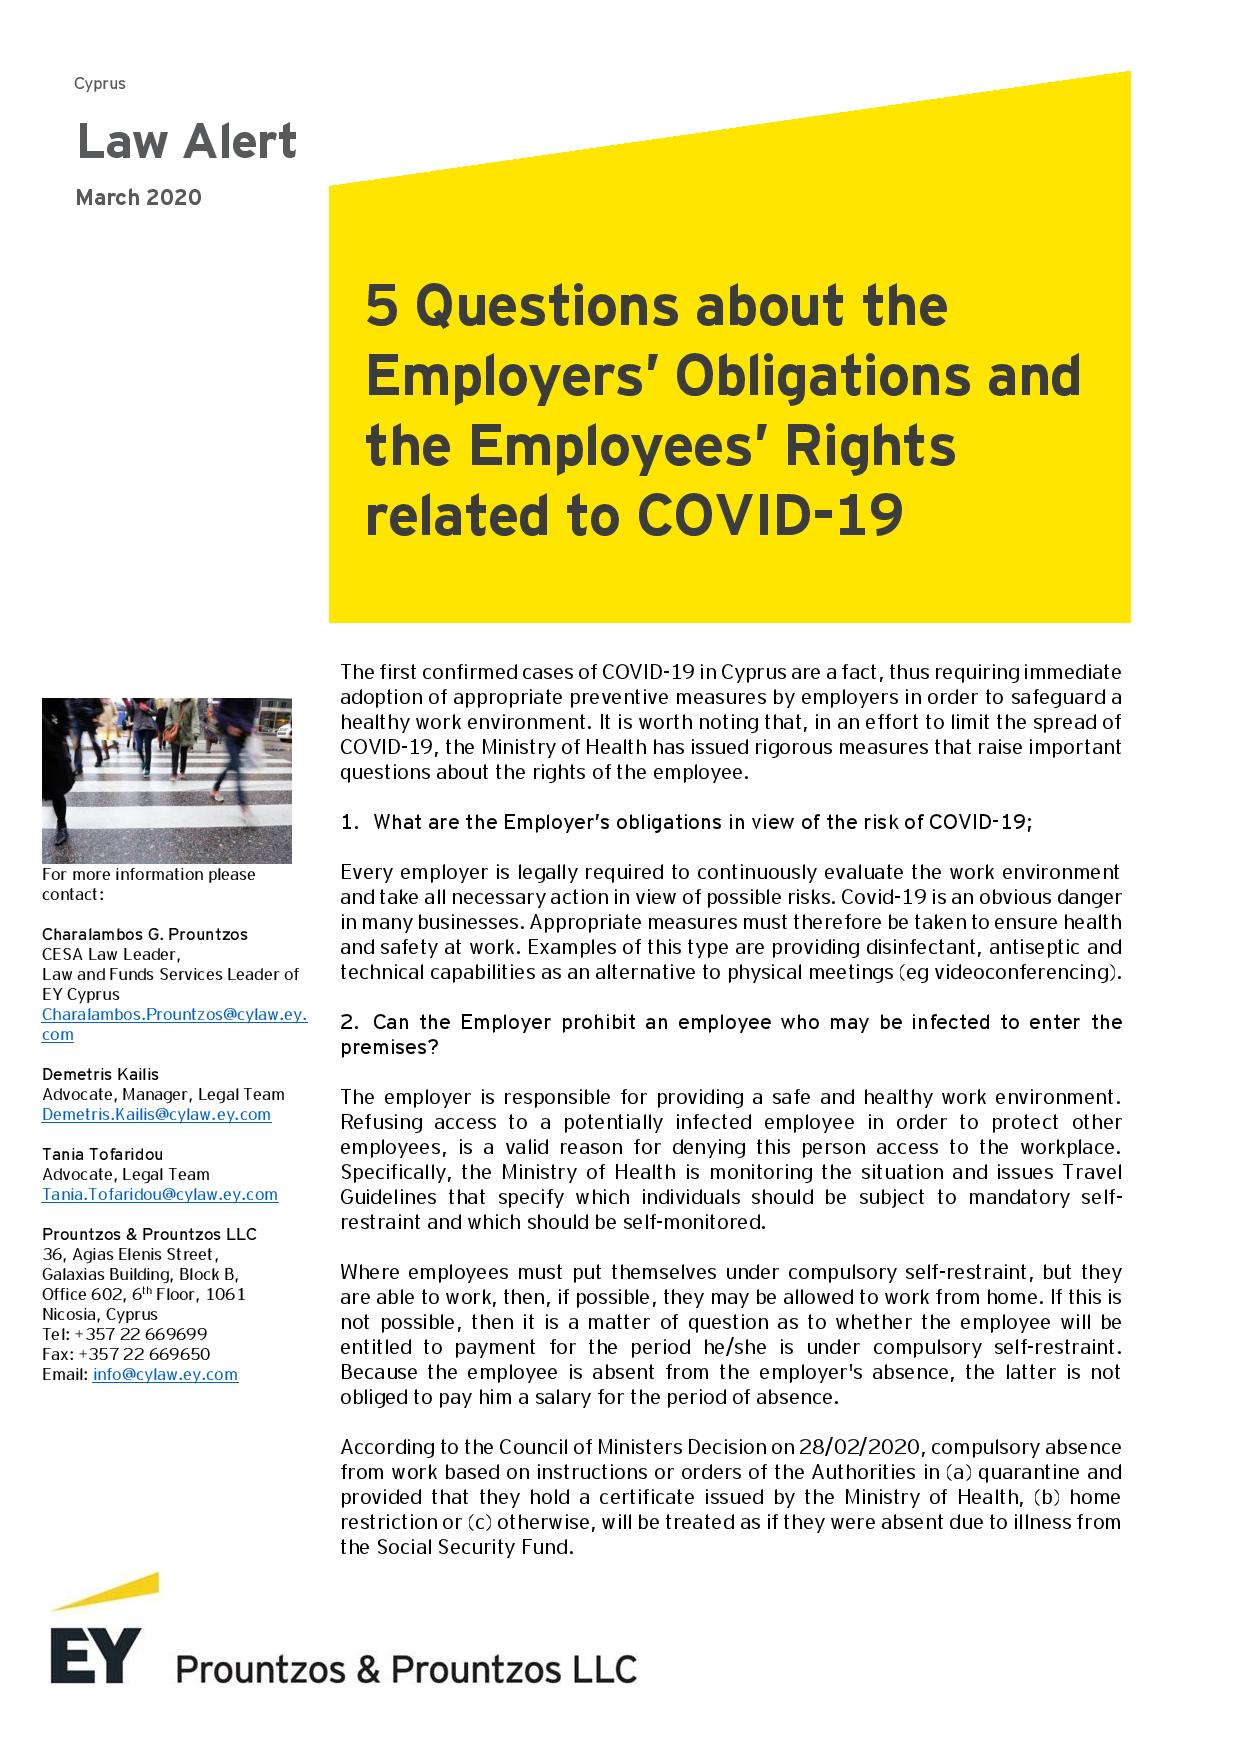 EY Cyprus: 5 Questions about the Employers’ Obligations and the Employees’ Rights related to COVID-19